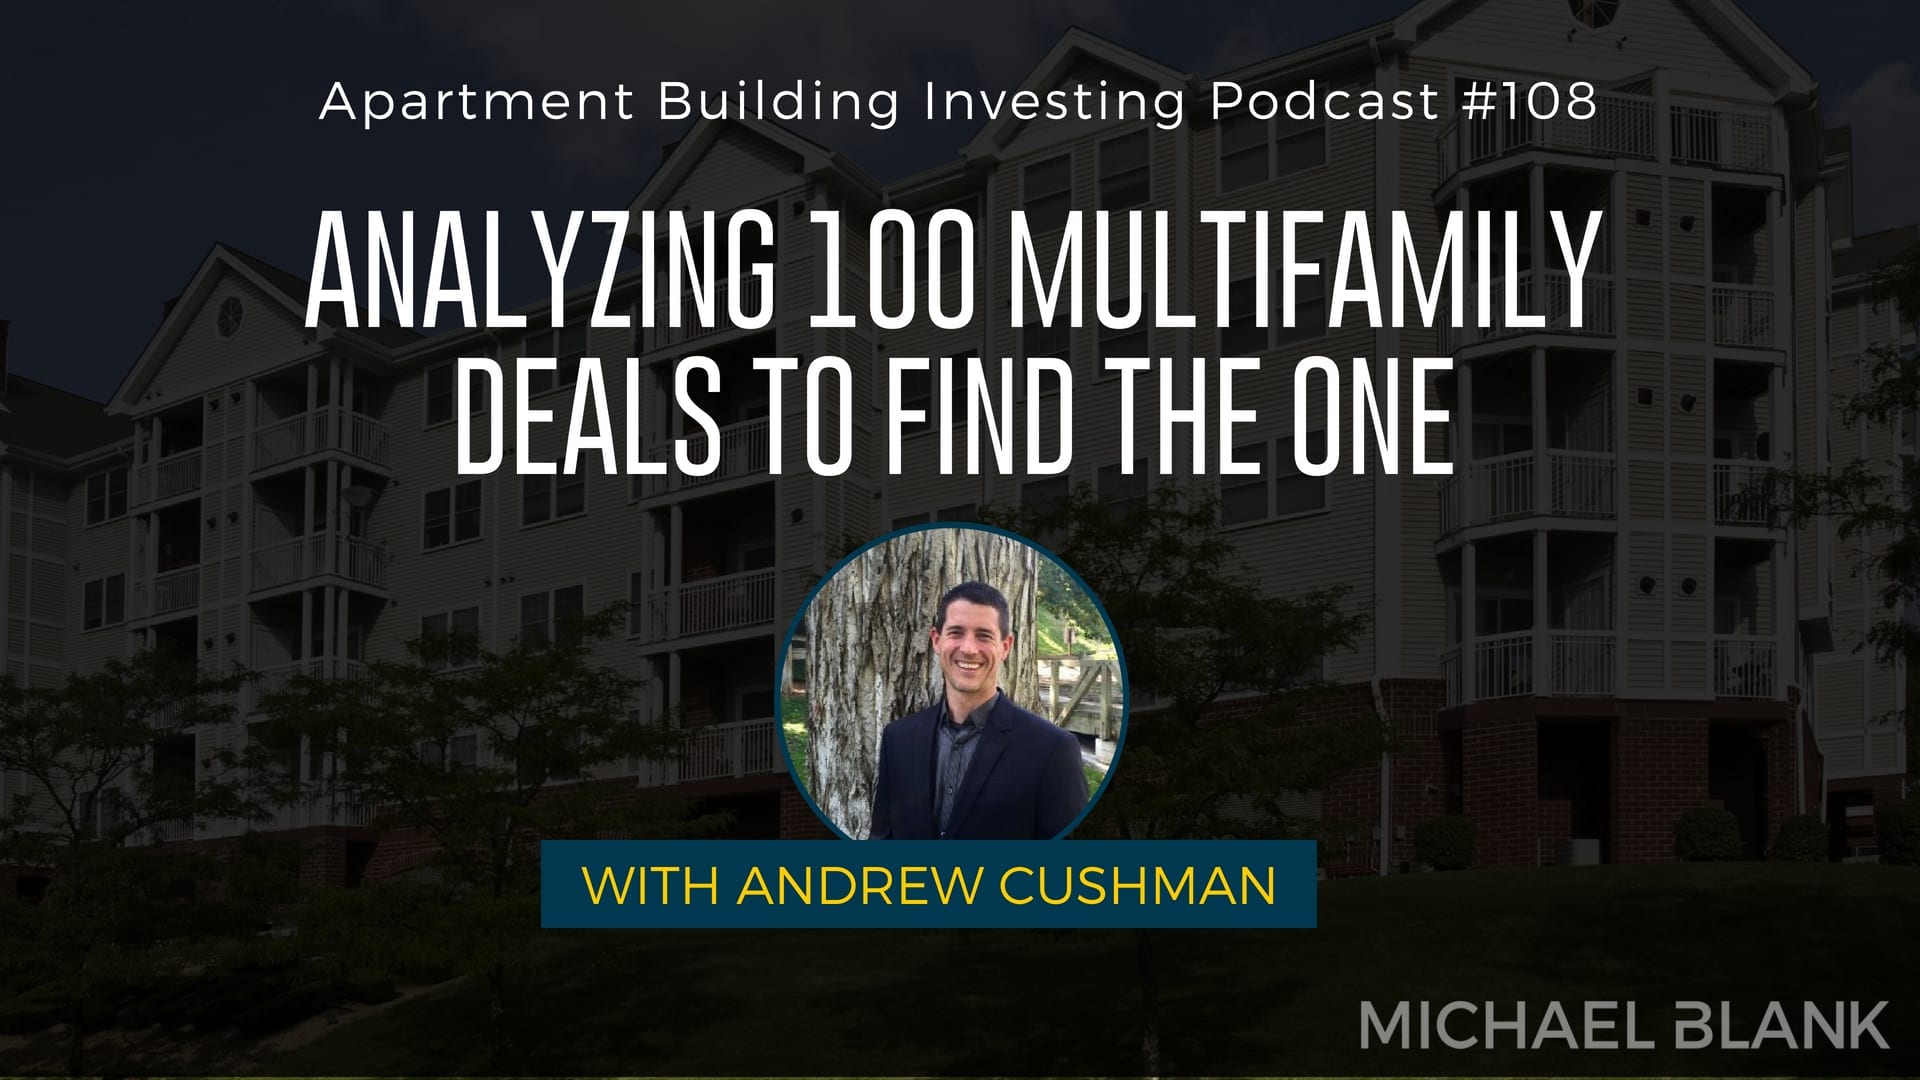 MB 108: Analyzing 100 Multifamily Deals to Find the ONE – With Andrew Cushman